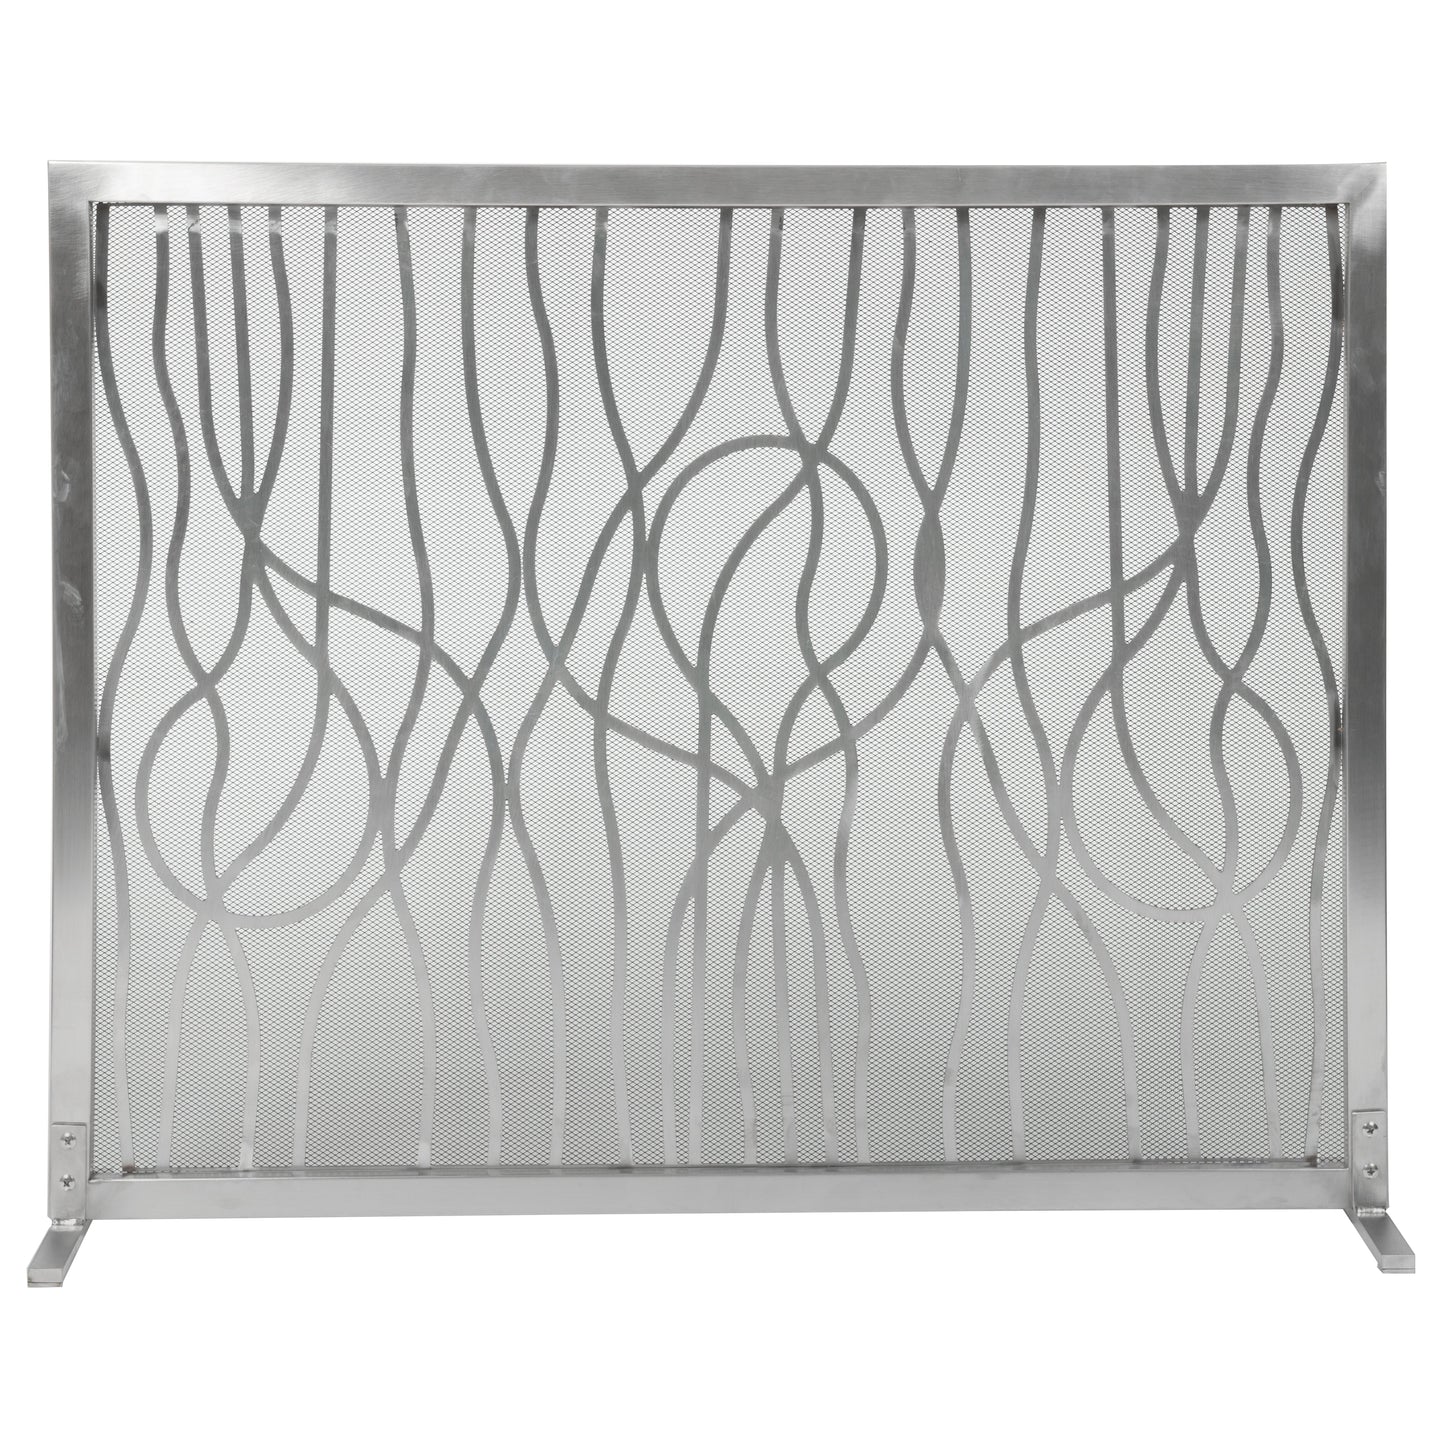 39" Stainless Steel Stainless Steel Panel Screen